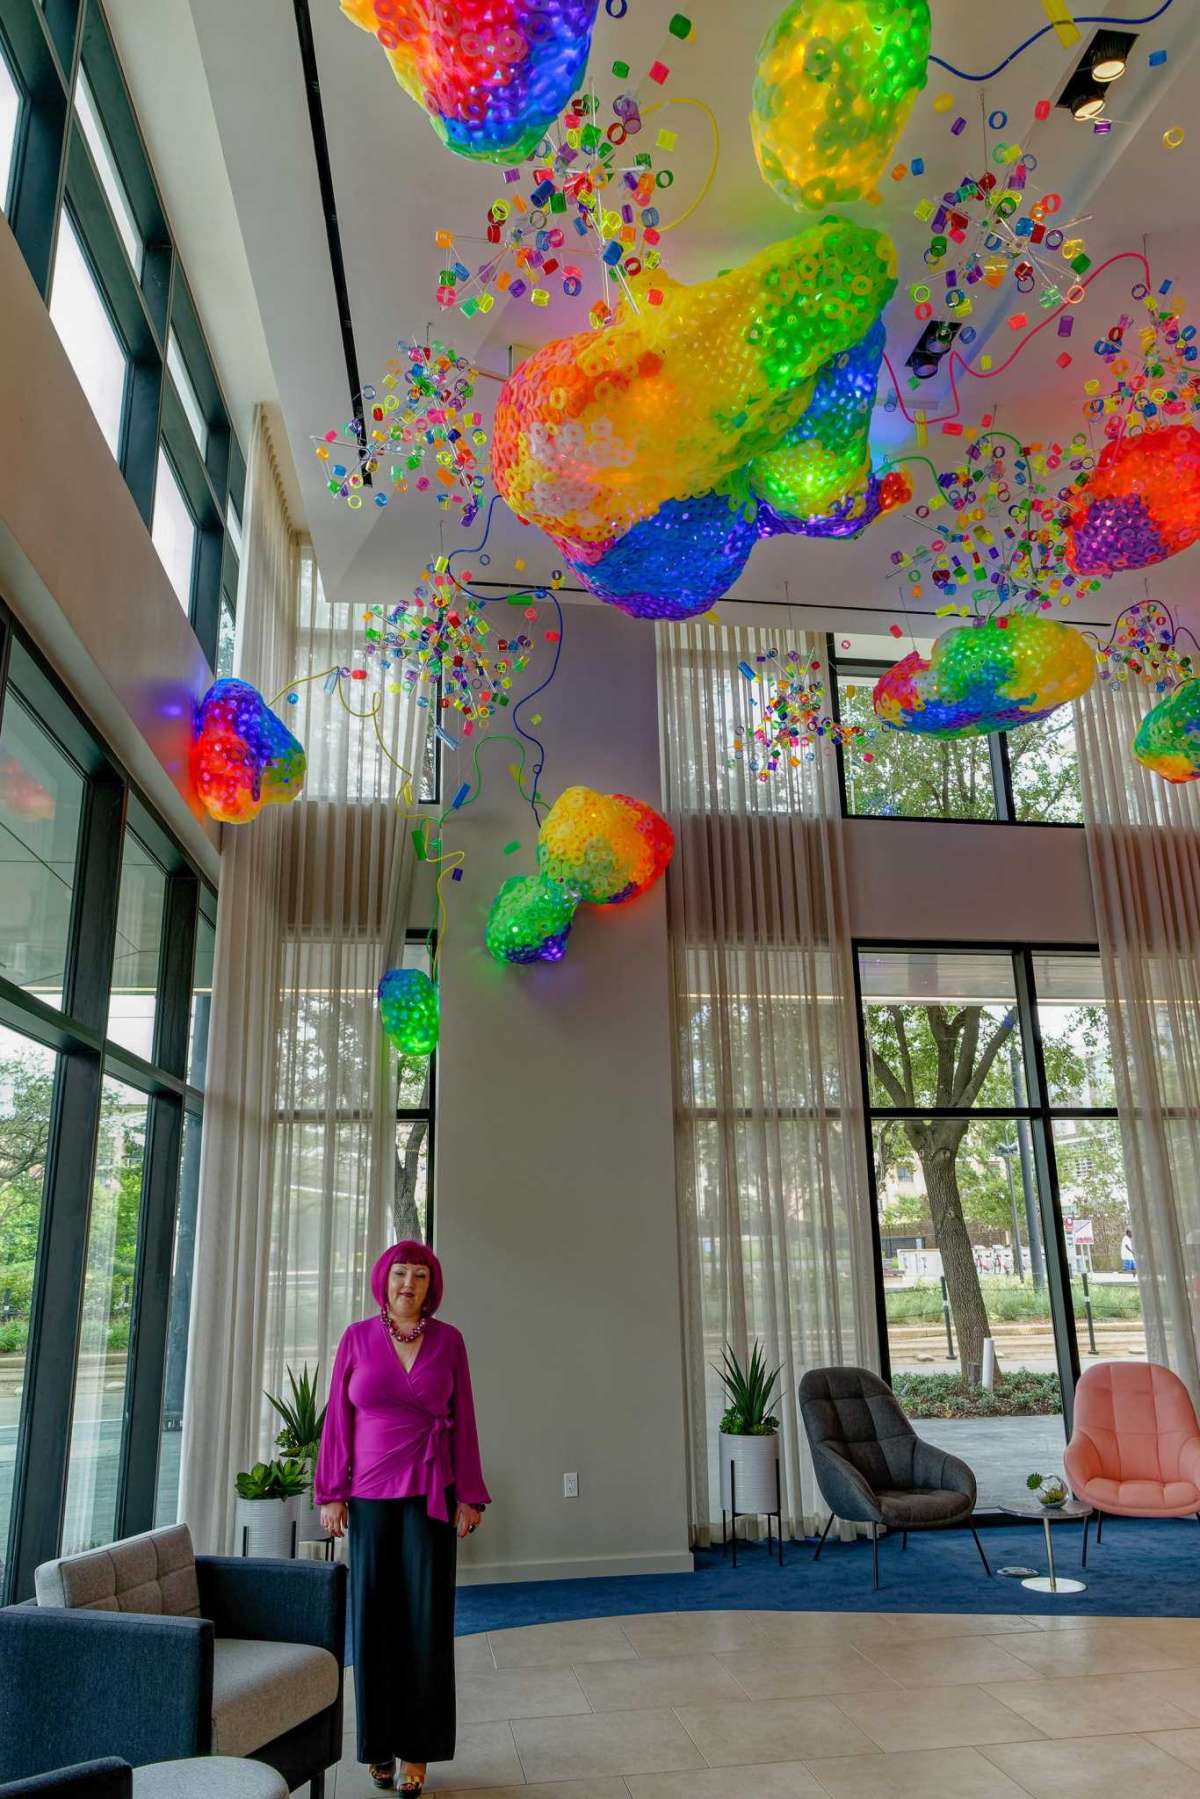 Houston artist Adela Andea poses below "The Great Barrier Reef," her permanent installation for the lobby of Drewery Place, a new highrise project of the Australian firm Caydon USA in Midtown.